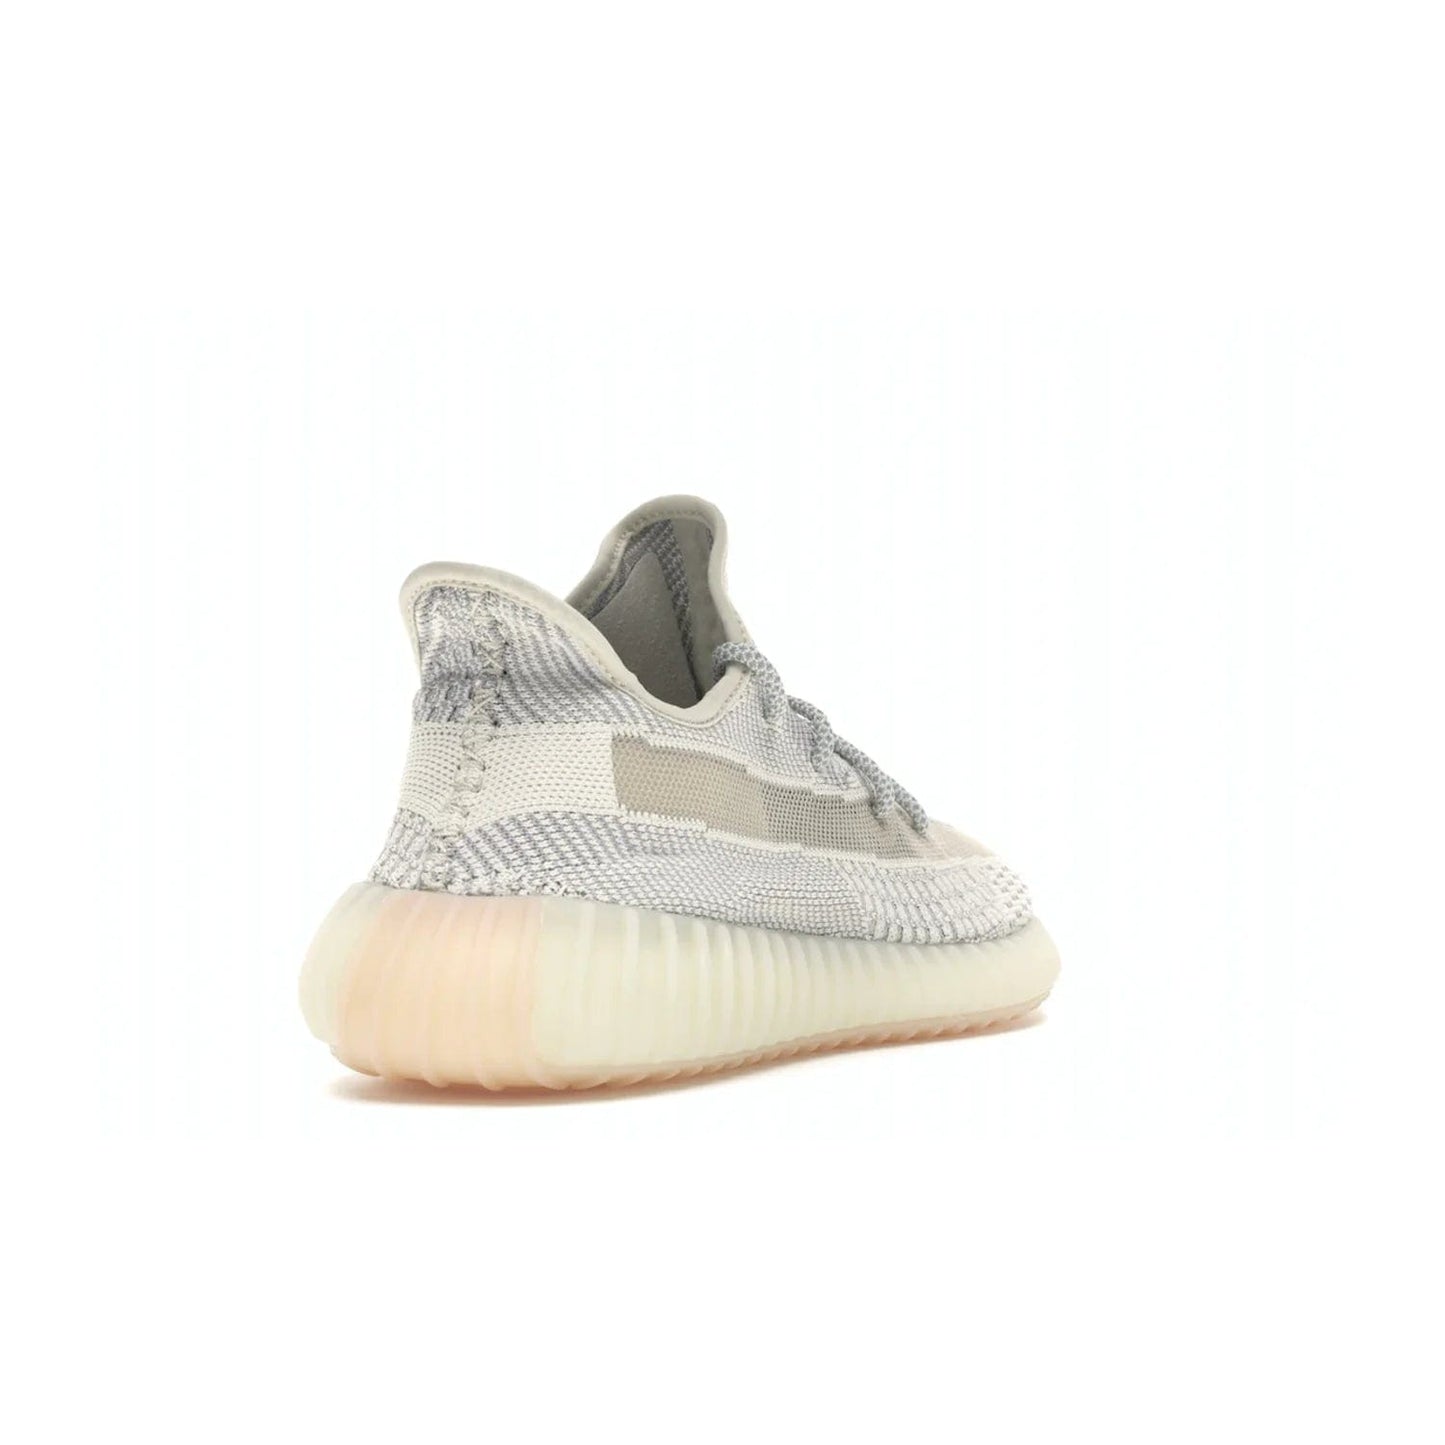 adidas Yeezy Boost 350 V2 Lundmark (Non Reflective) - Image 31 - Only at www.BallersClubKickz.com - Shop the exclusive adidas Yeezy Boost 350 V2 Lundmark with a subtle summer color, mesh upper, white-to-cream transitional midsole, light tan outsole, and pink middle stripe. Comfort and style come together in this perfect summer 350 V2. Released on July 11, 2019.